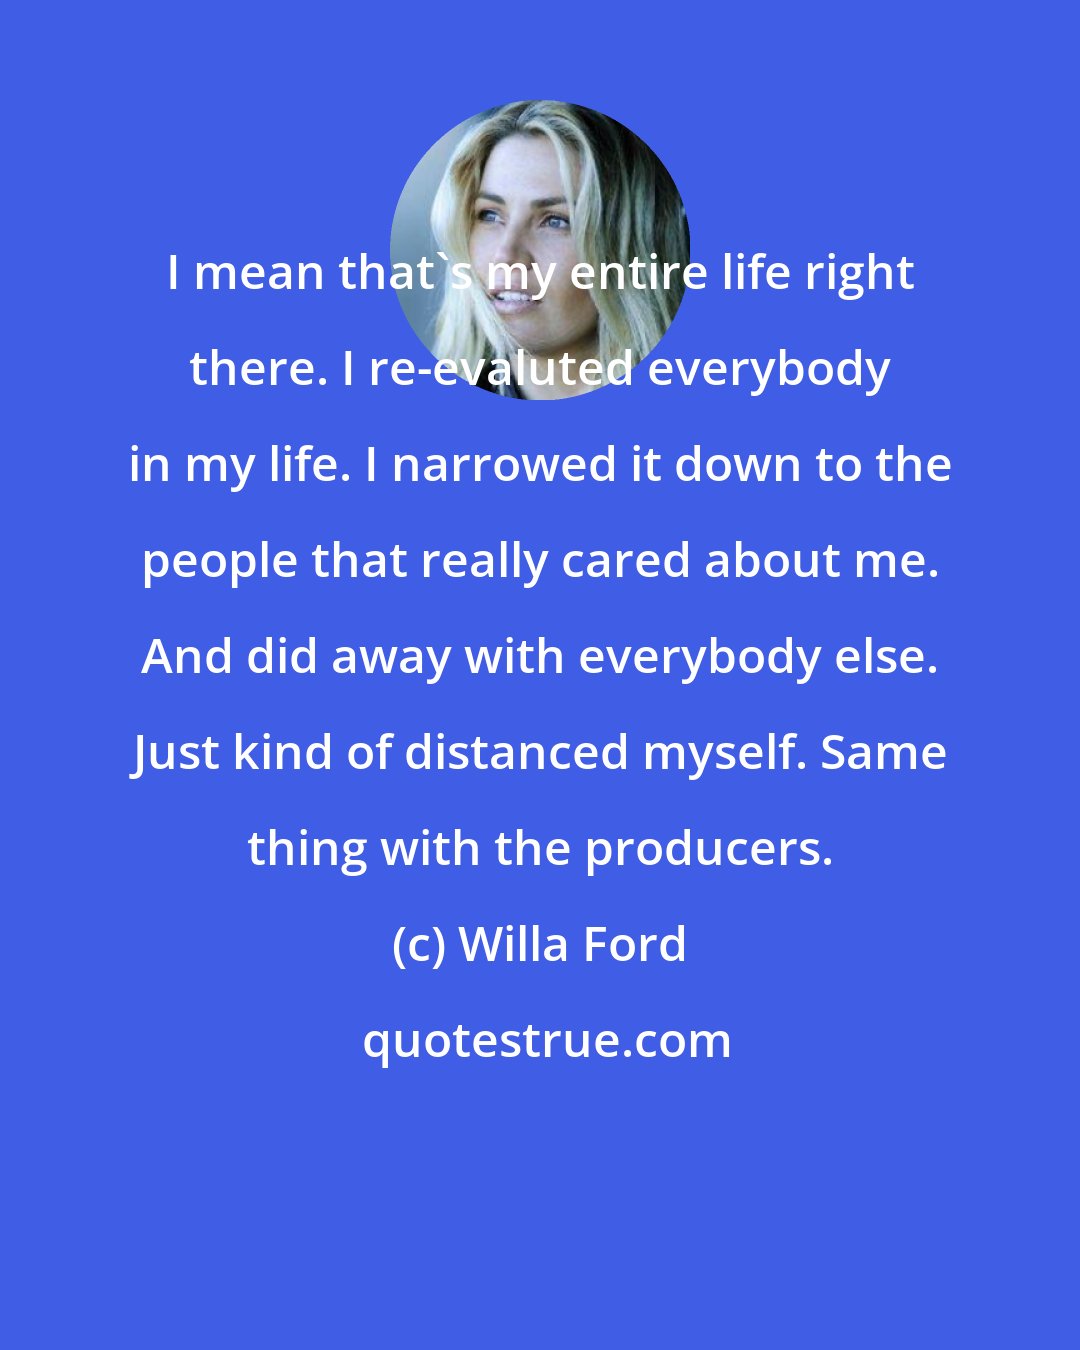 Willa Ford: I mean that's my entire life right there. I re-evaluted everybody in my life. I narrowed it down to the people that really cared about me. And did away with everybody else. Just kind of distanced myself. Same thing with the producers.